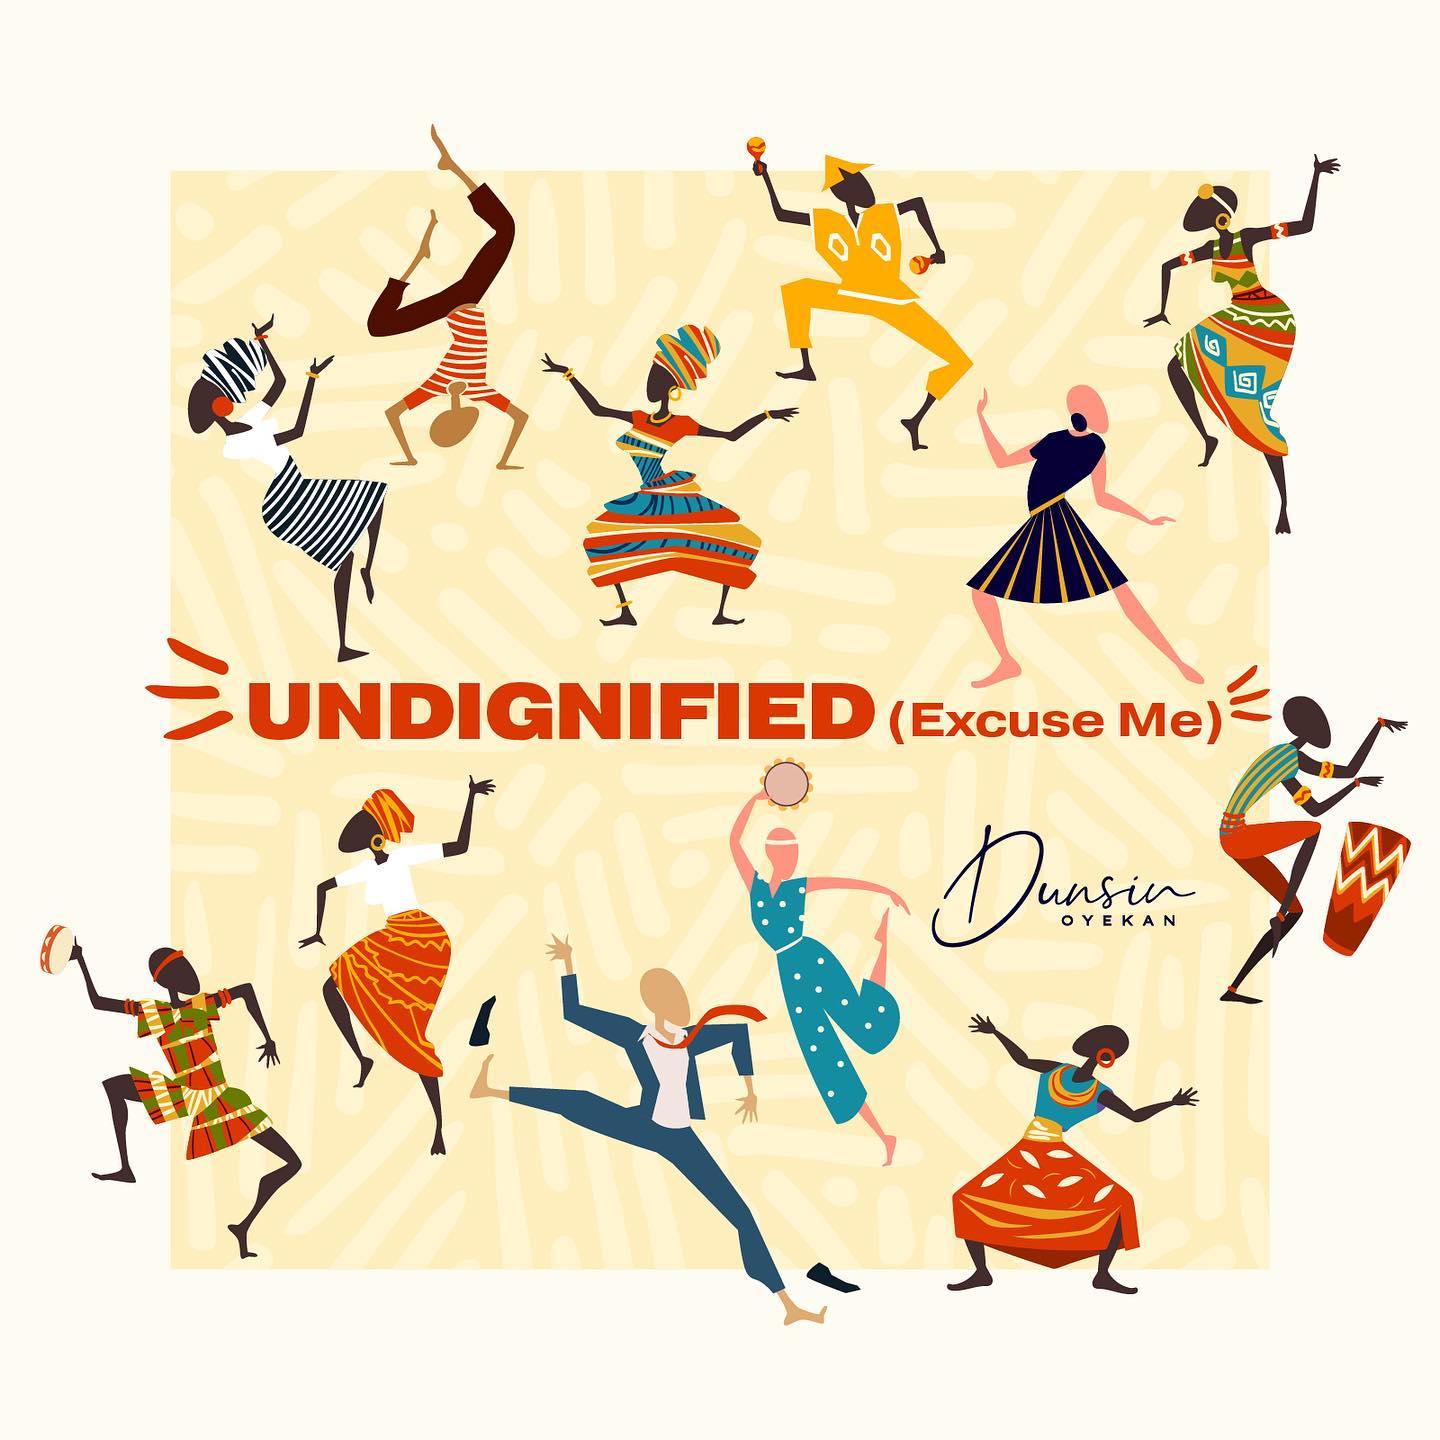 Dunsin Oyekan Releases Vibrating Worship Song 'Undignified' (Excuse Me) 1